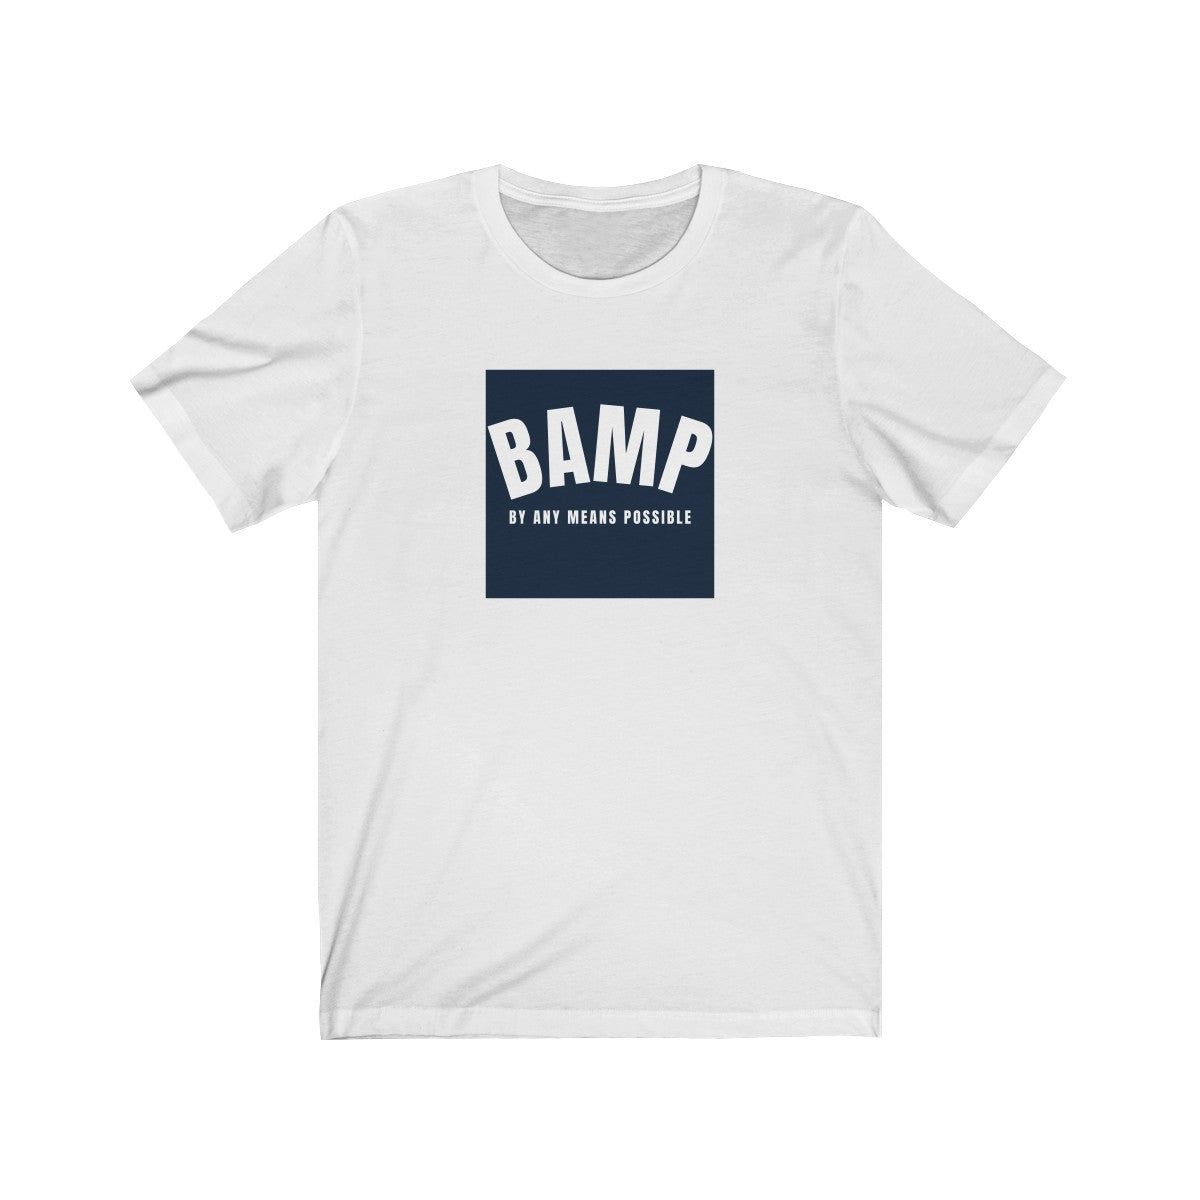 BAMP - By Any Means Possible - Unisex T-Shirt (2 Colors) - Beyond The Walls Int'l